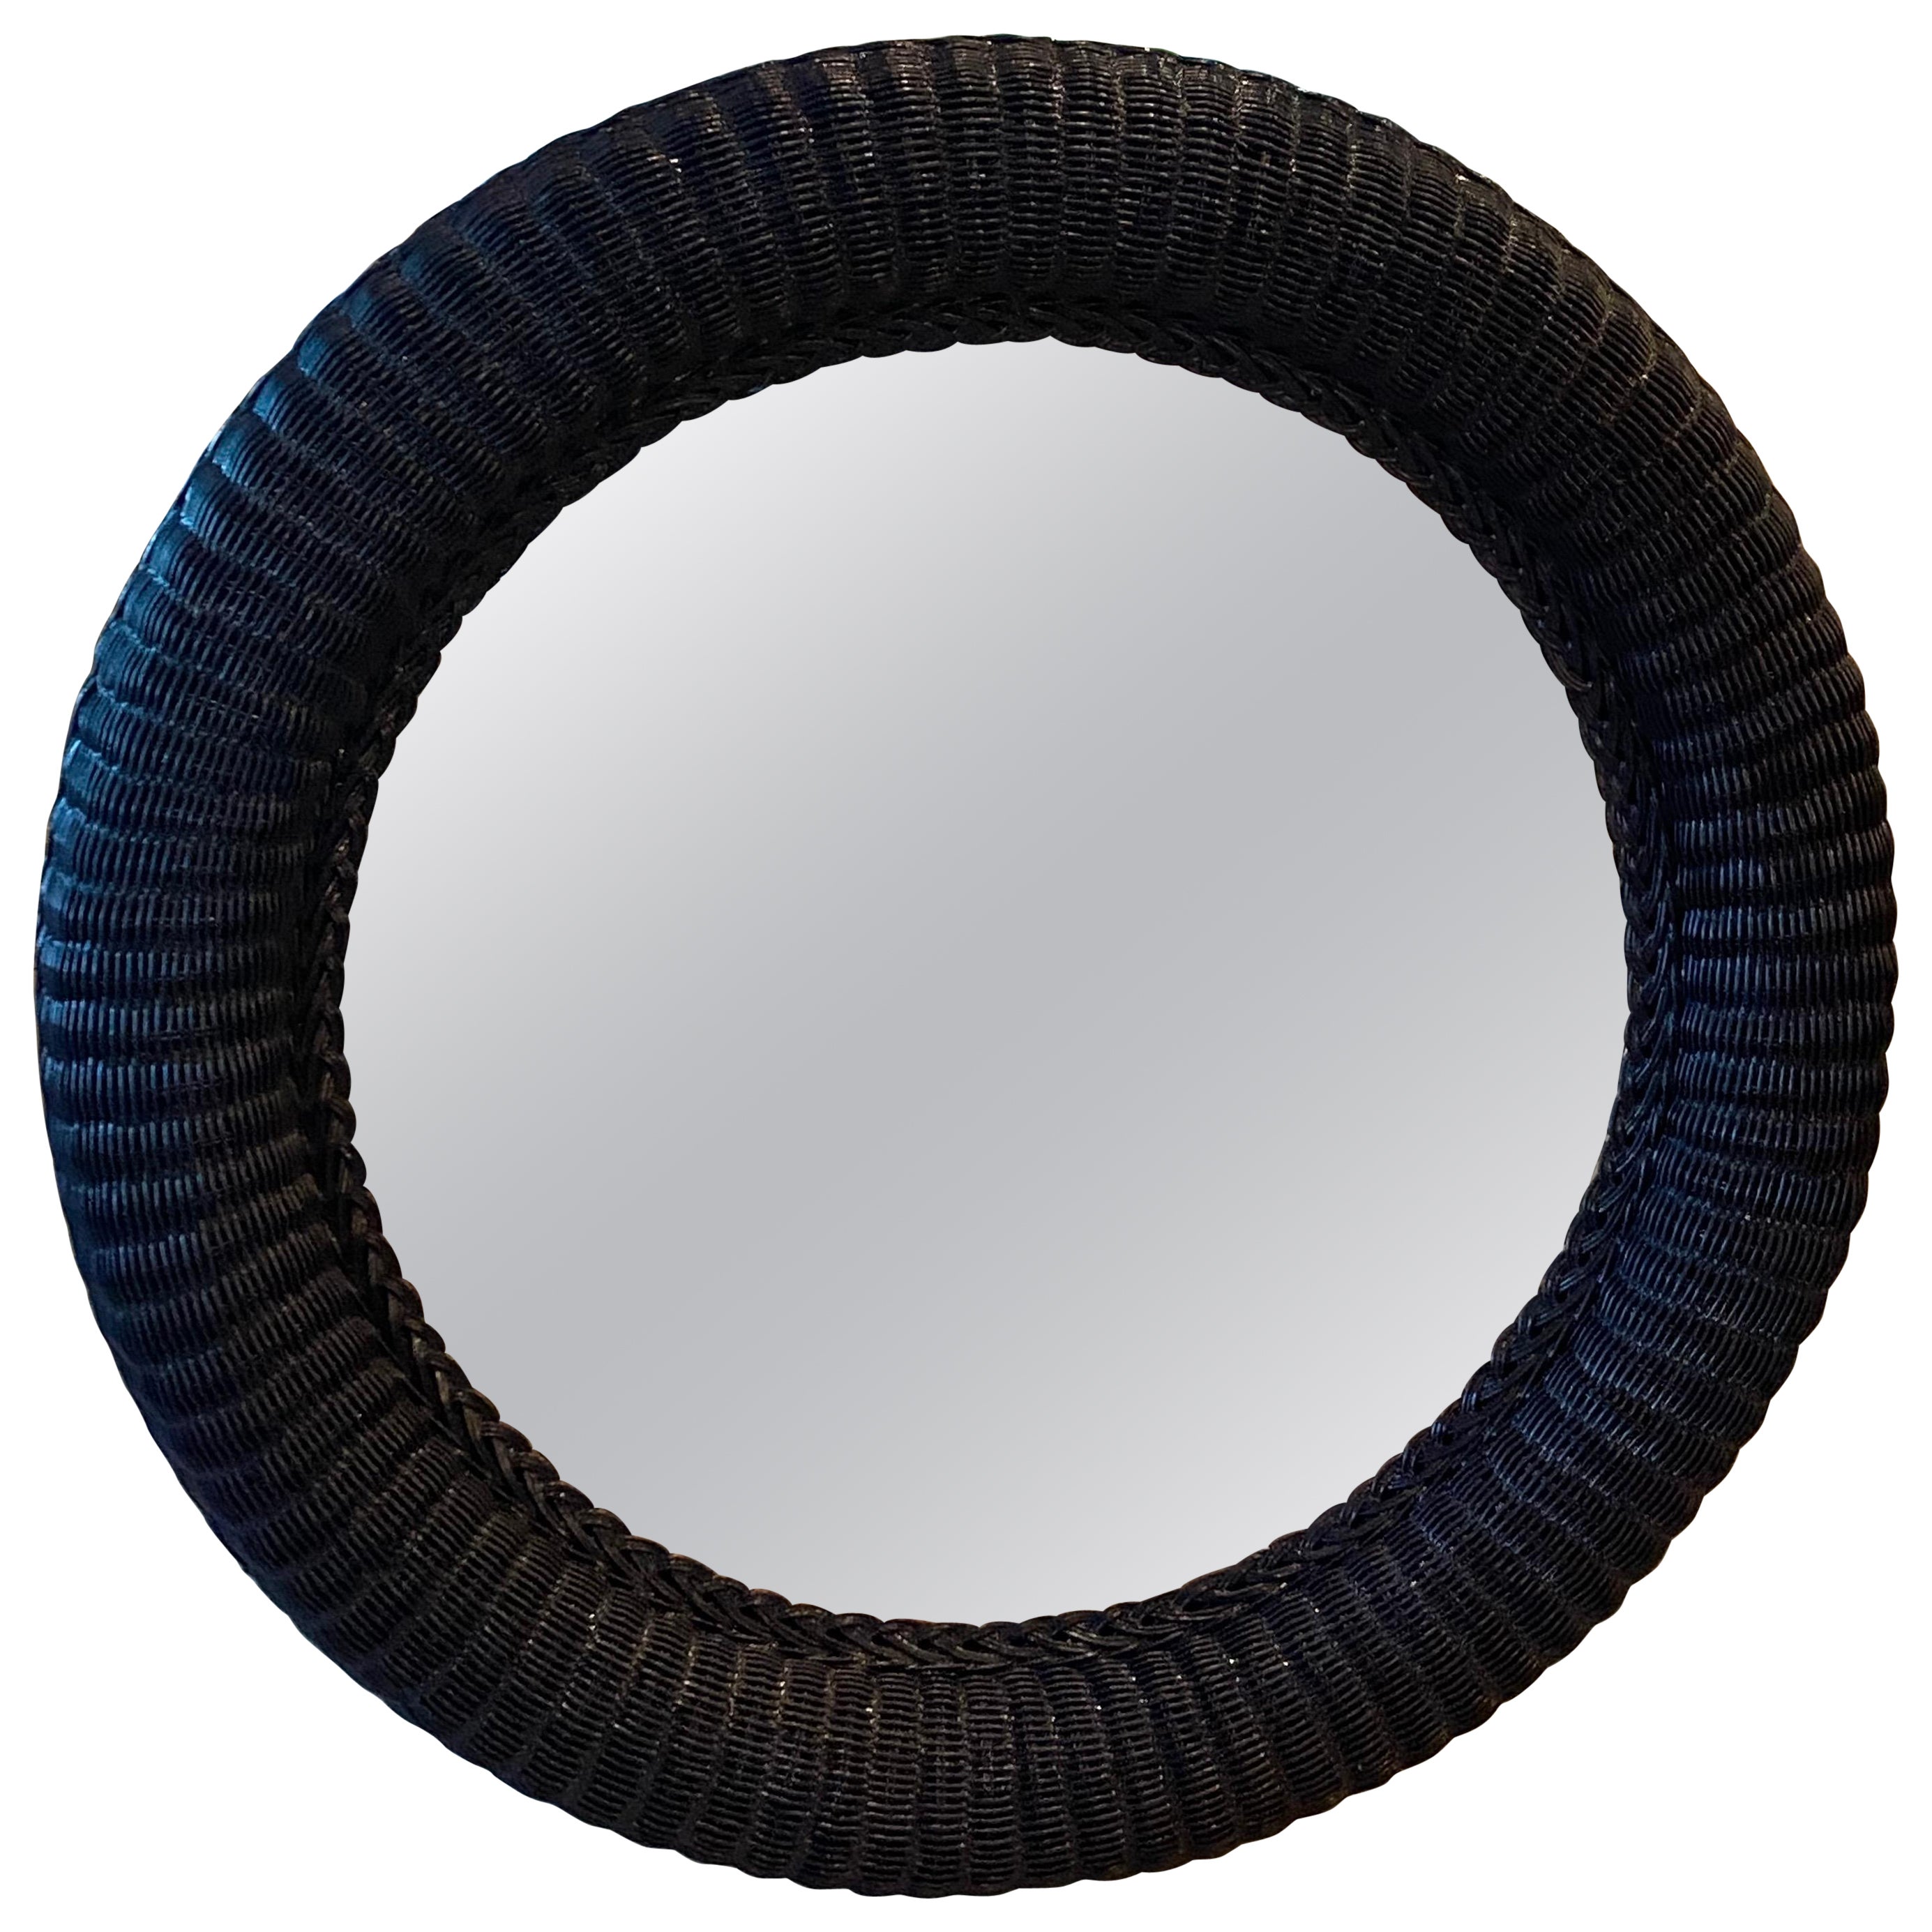 Vintage Braided Wicker Navy Blue Lacquered Round Wall Mirror